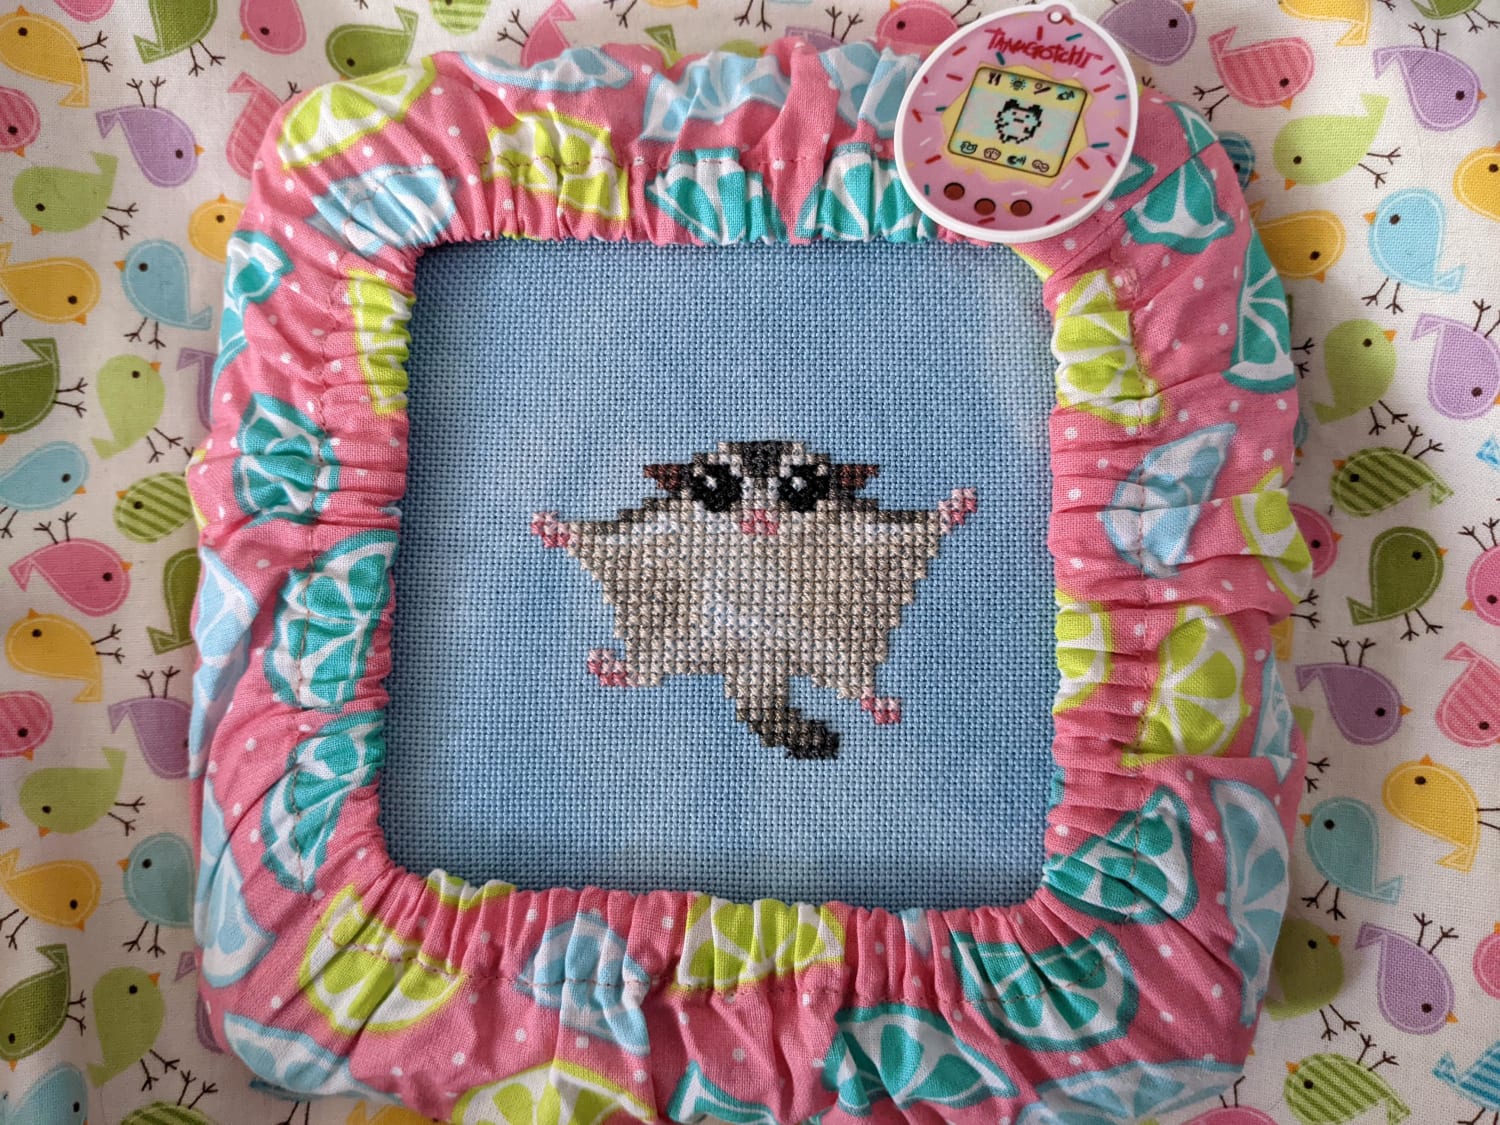 [FO] Sugar Glider! By LaSelvaDesign on Etsy.